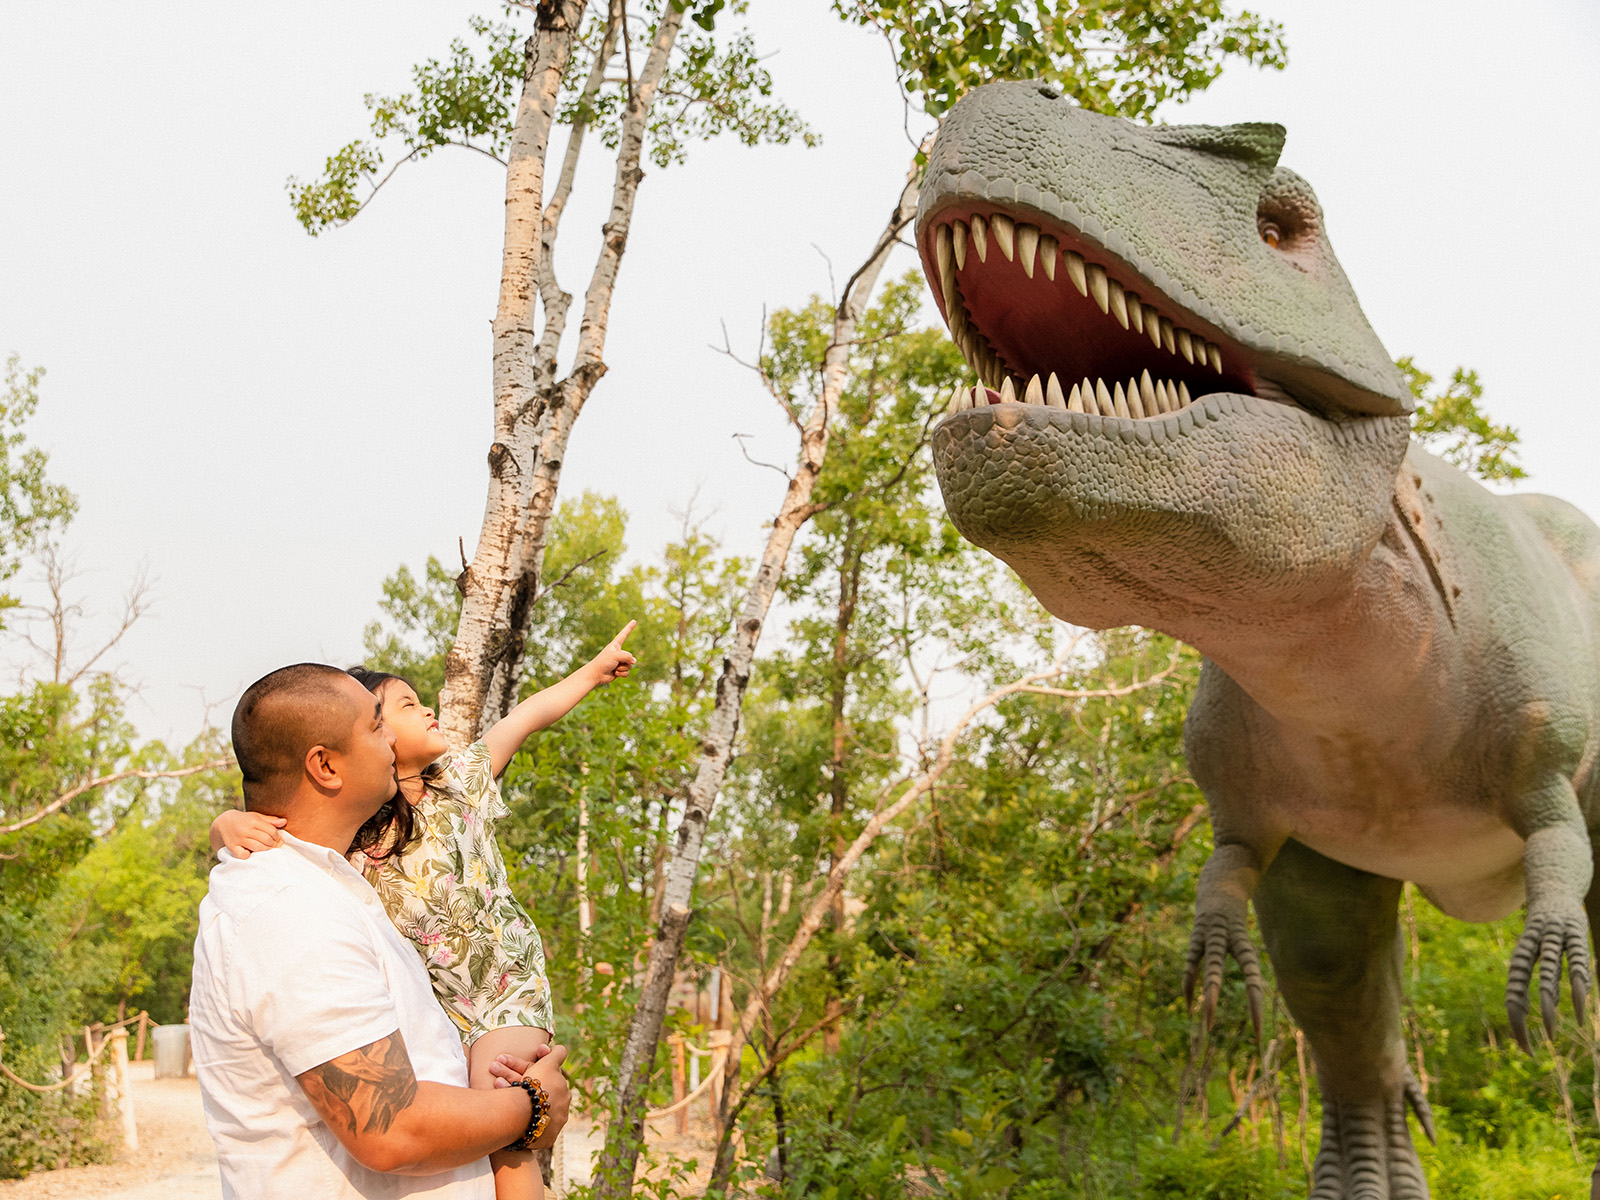 Father hold up young daughter who points at a large animatronic dinosaur